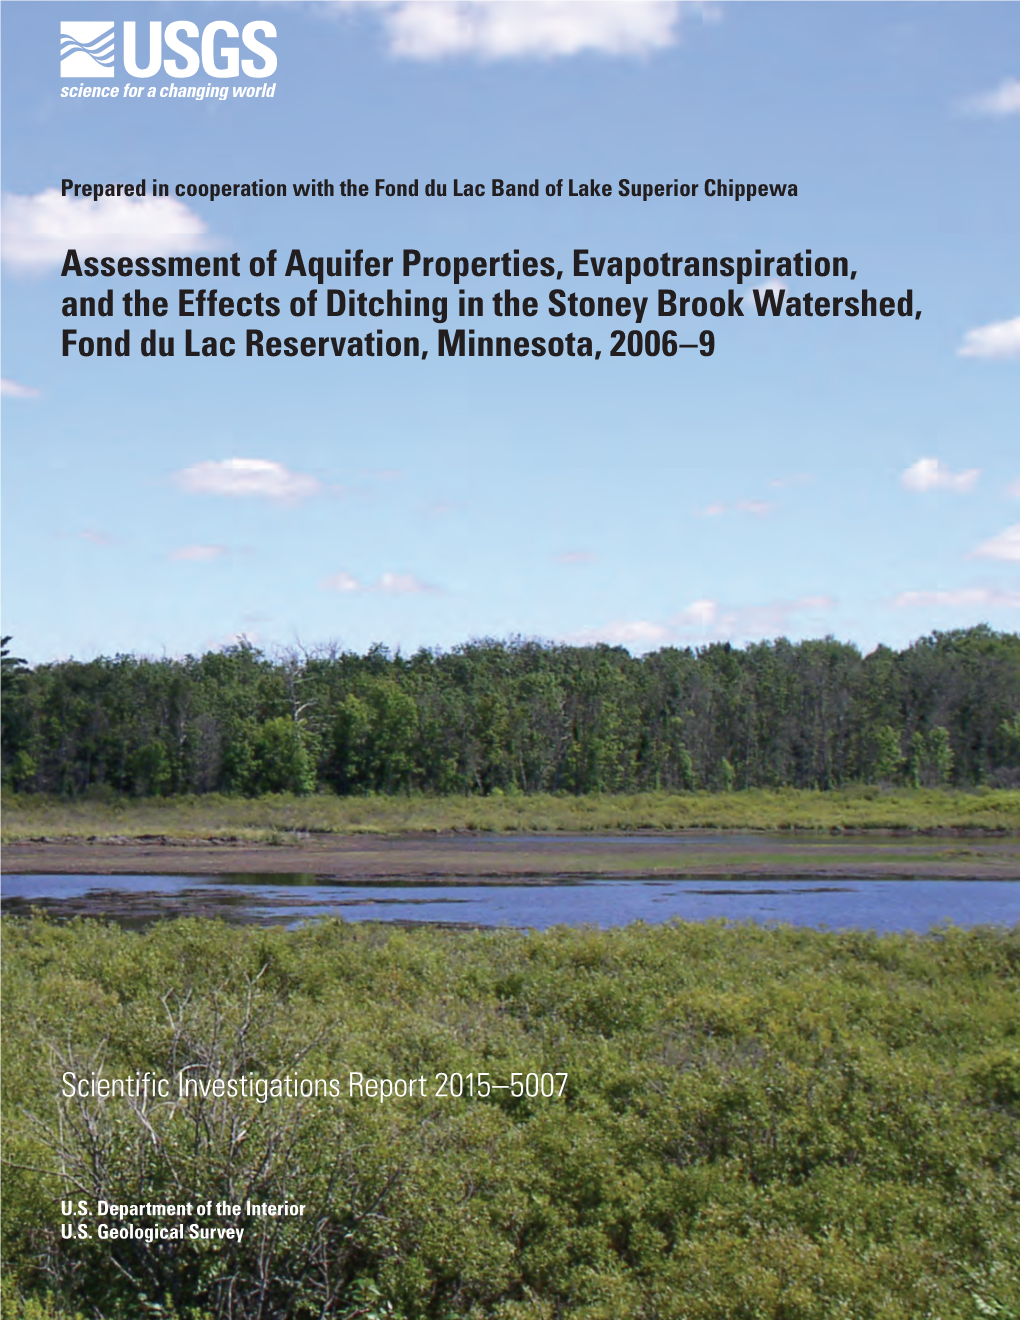 Assessment of Aquifer Properties, Evapotranspiration, and the Effects of Ditching in the Stoney Brook Watershed, Fond Du Lac Reservation, Minnesota, 2006–9